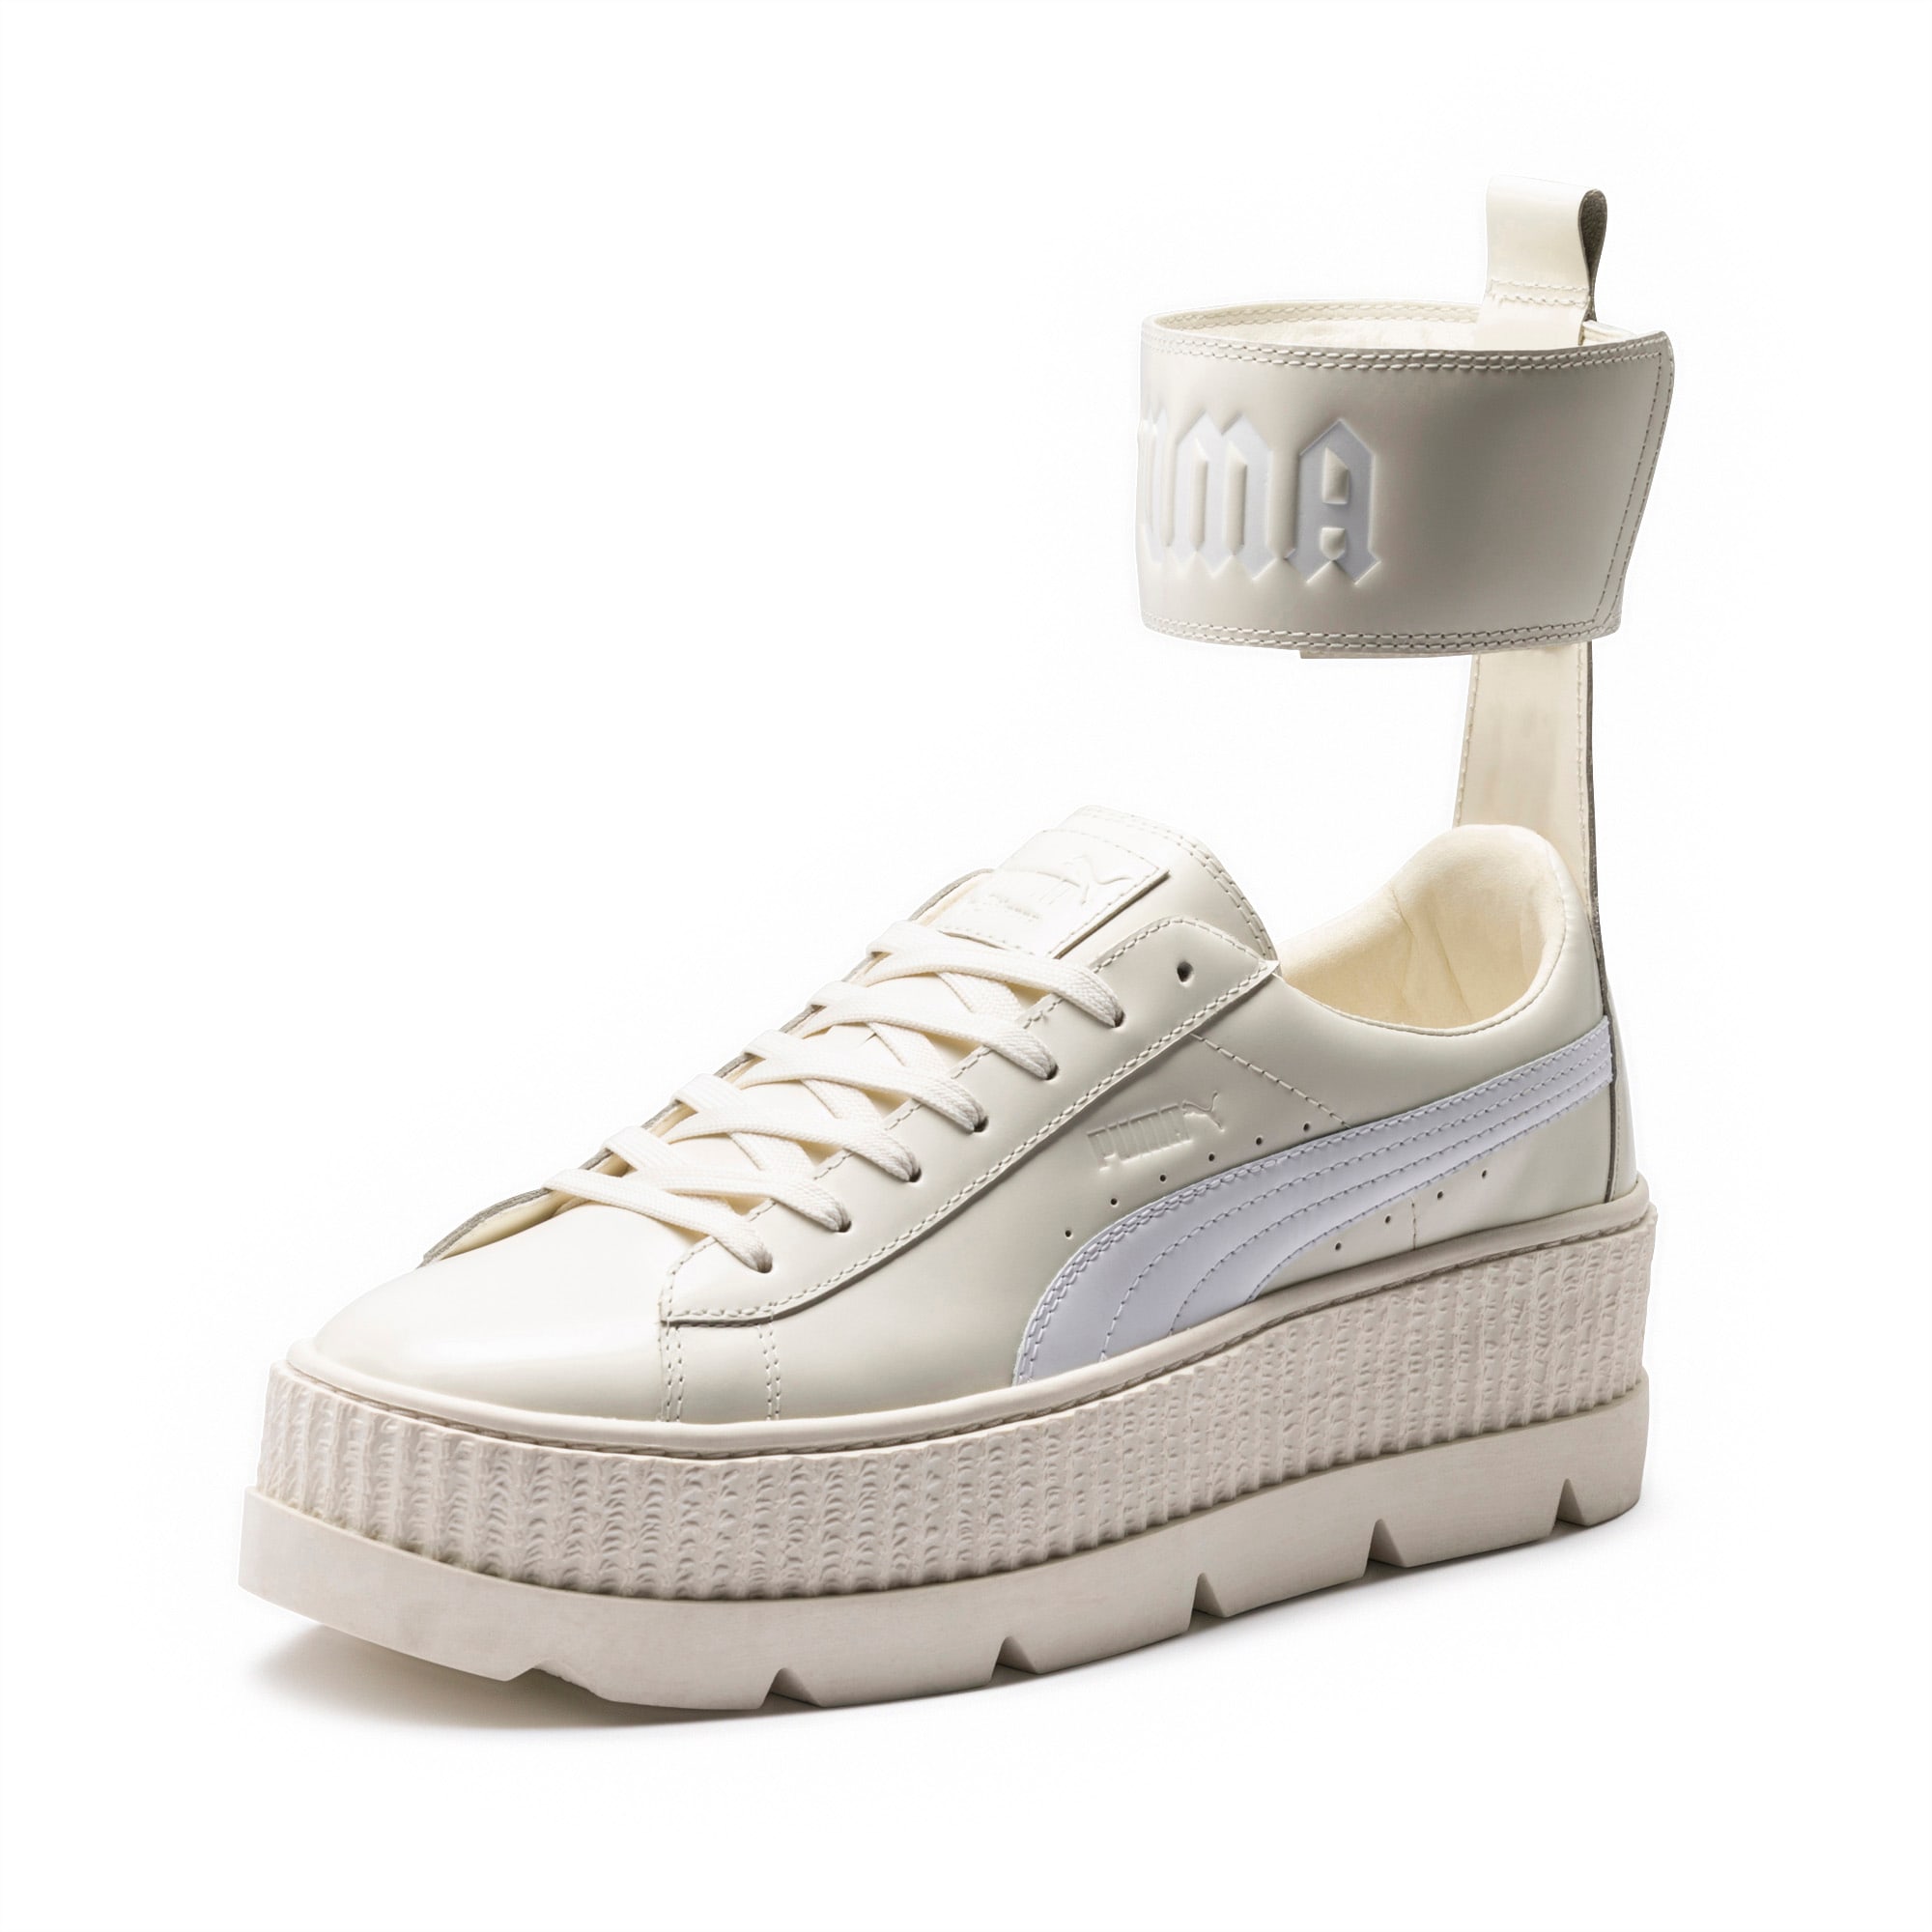 puma creepers with ankle strap